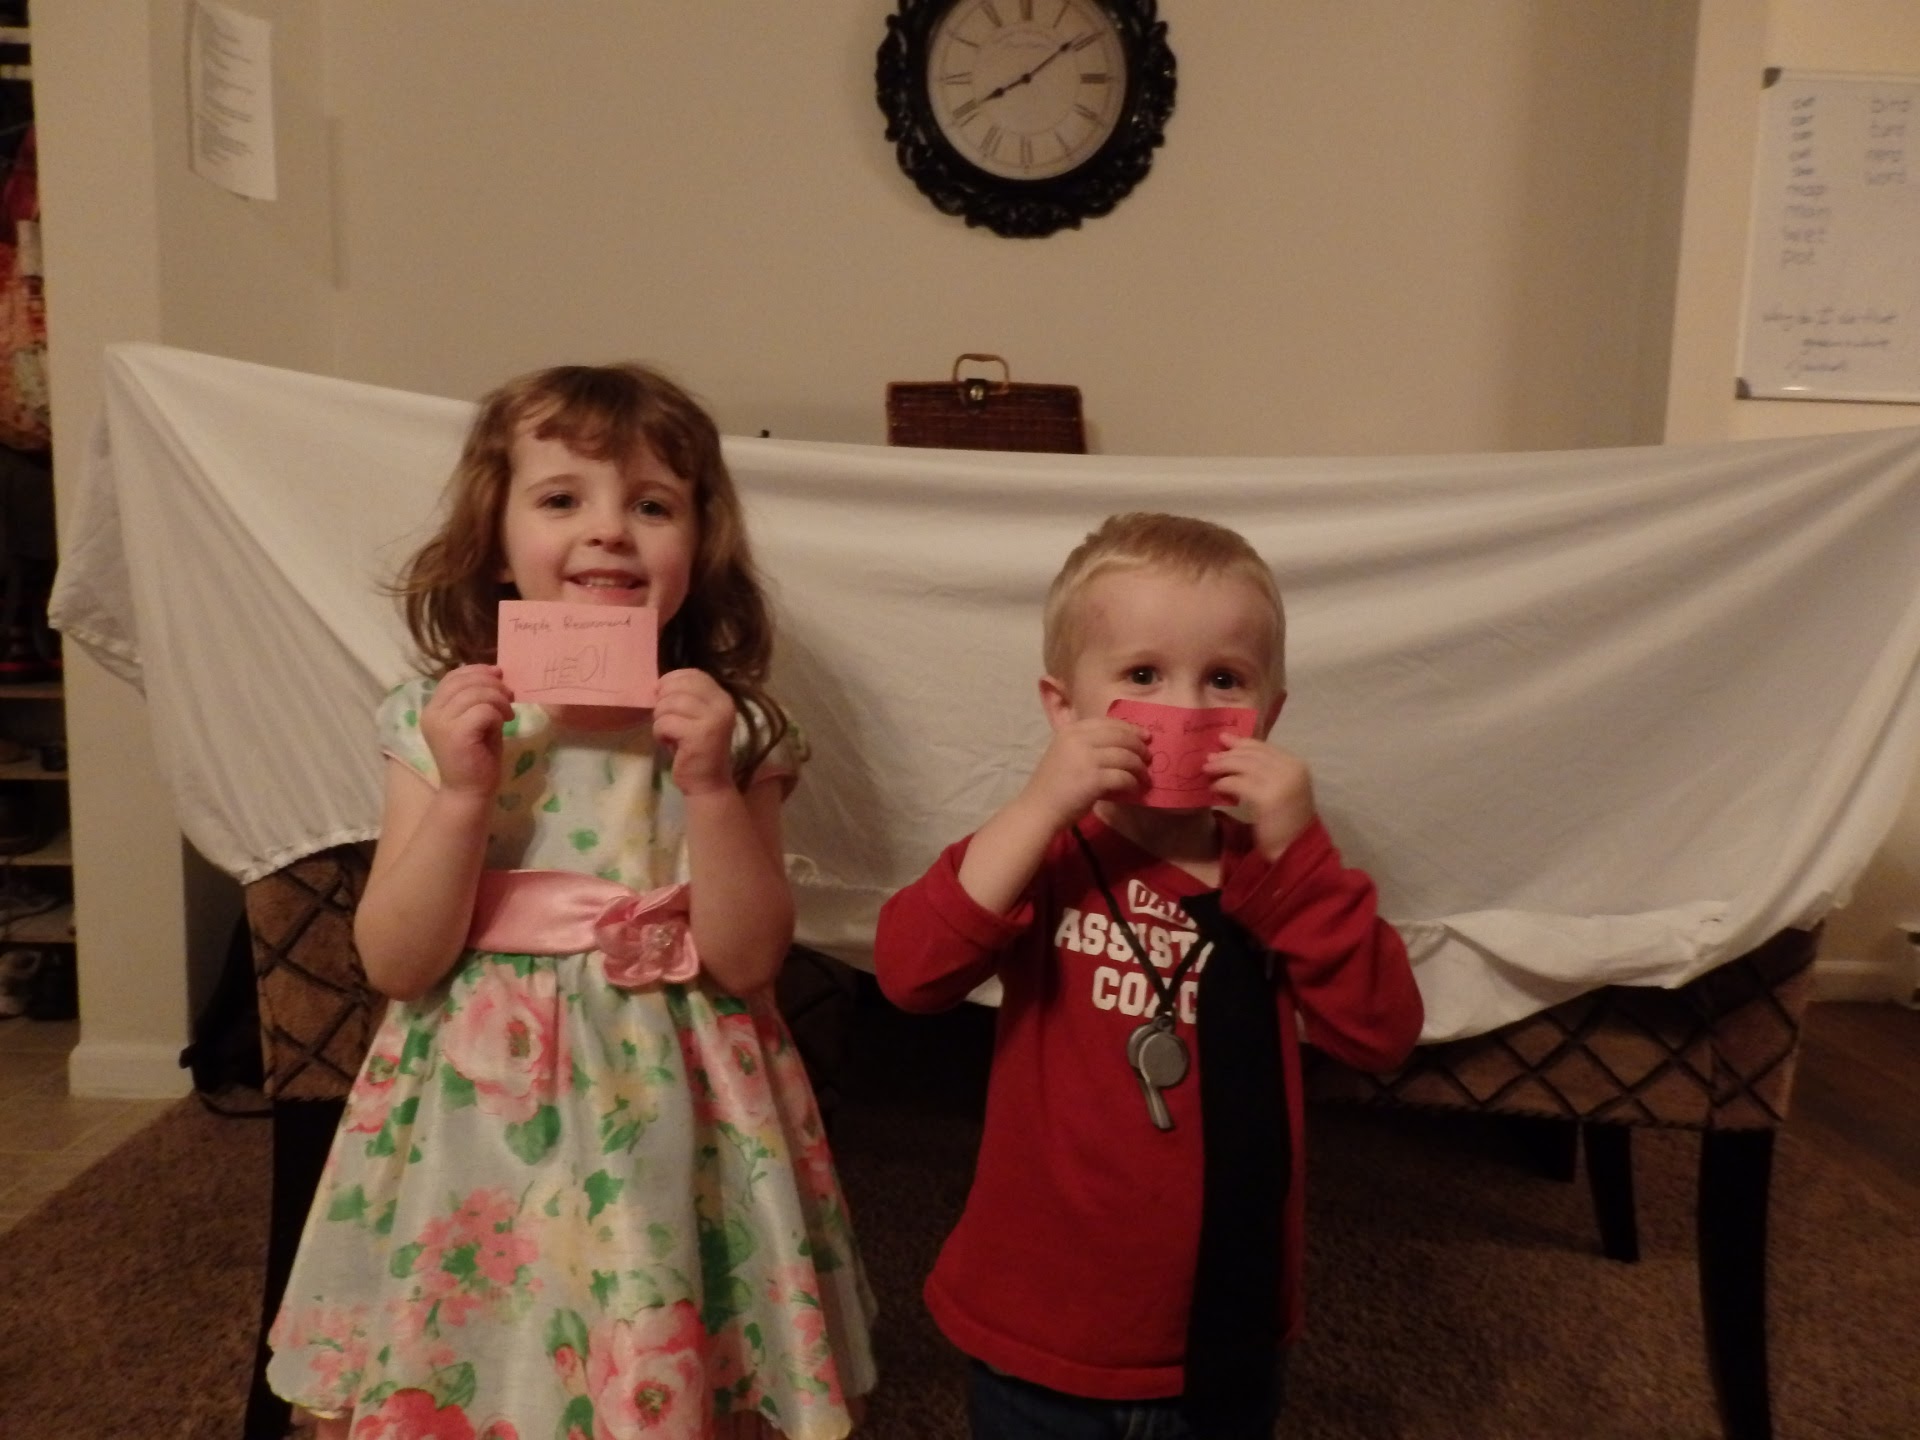 children holding up pieces of paper that look like temple recommends